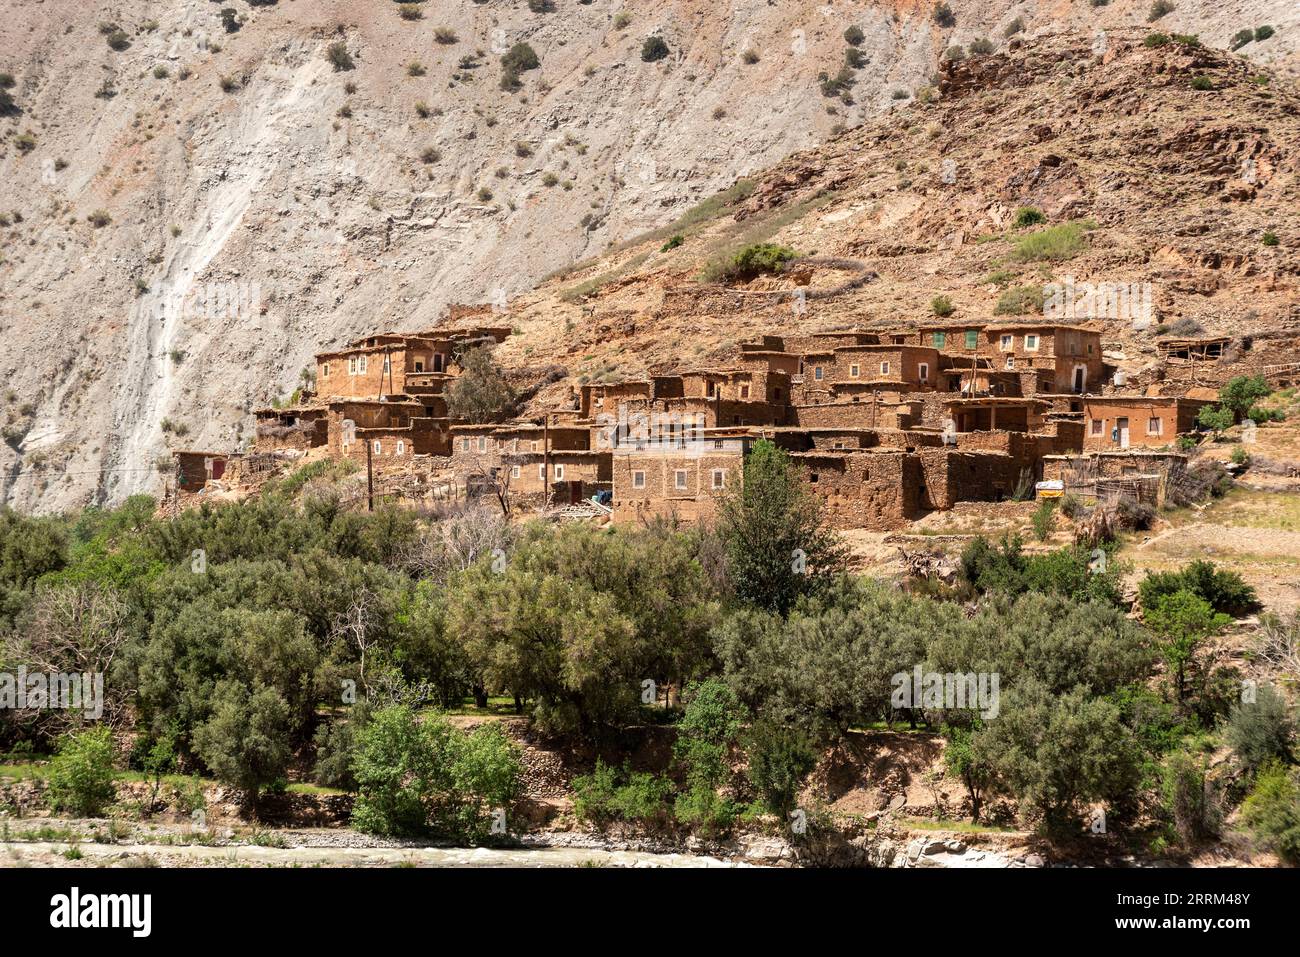 Picturesque village Douar Ouddift at the Tizi n'Test pass in the Atlas mountains of Morocco Stock Photo